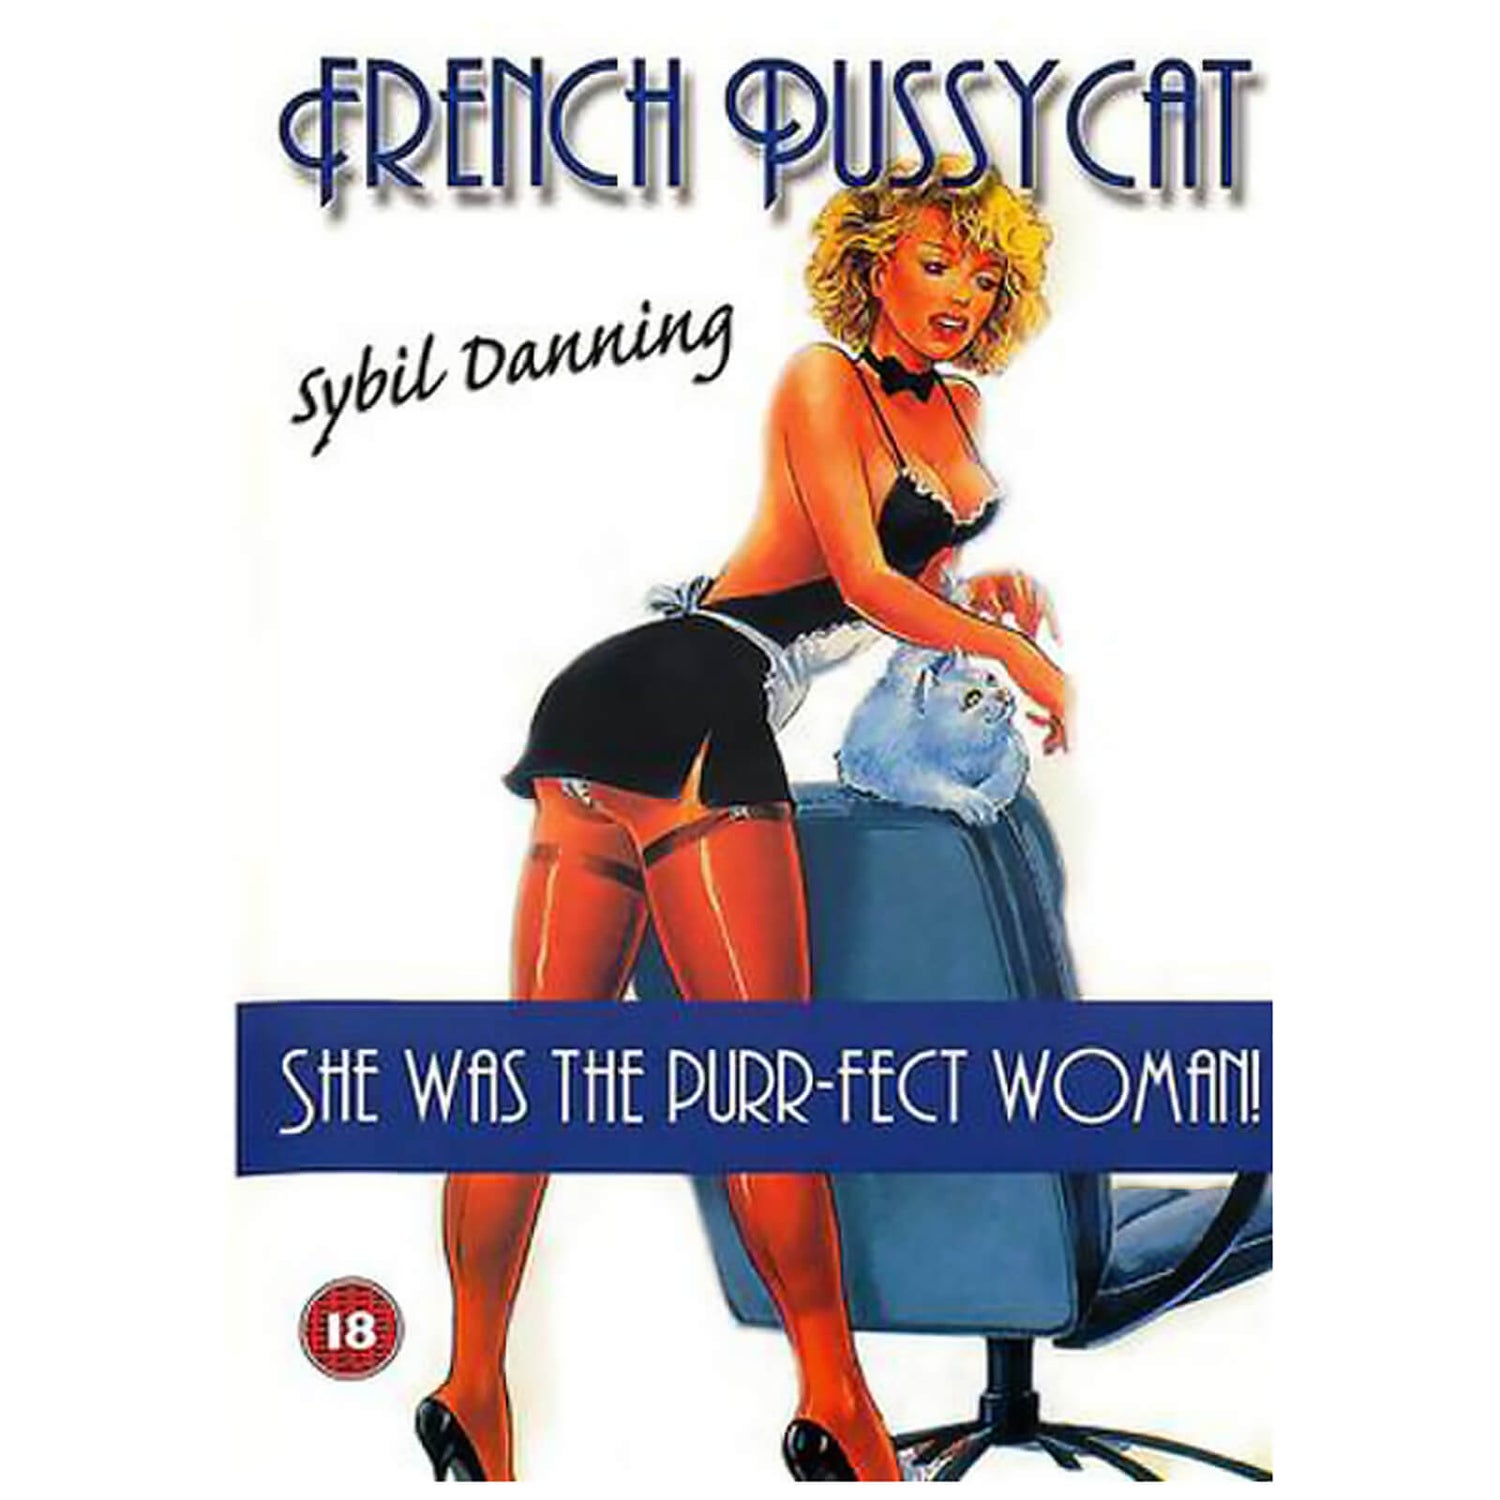 French Pussy Cat